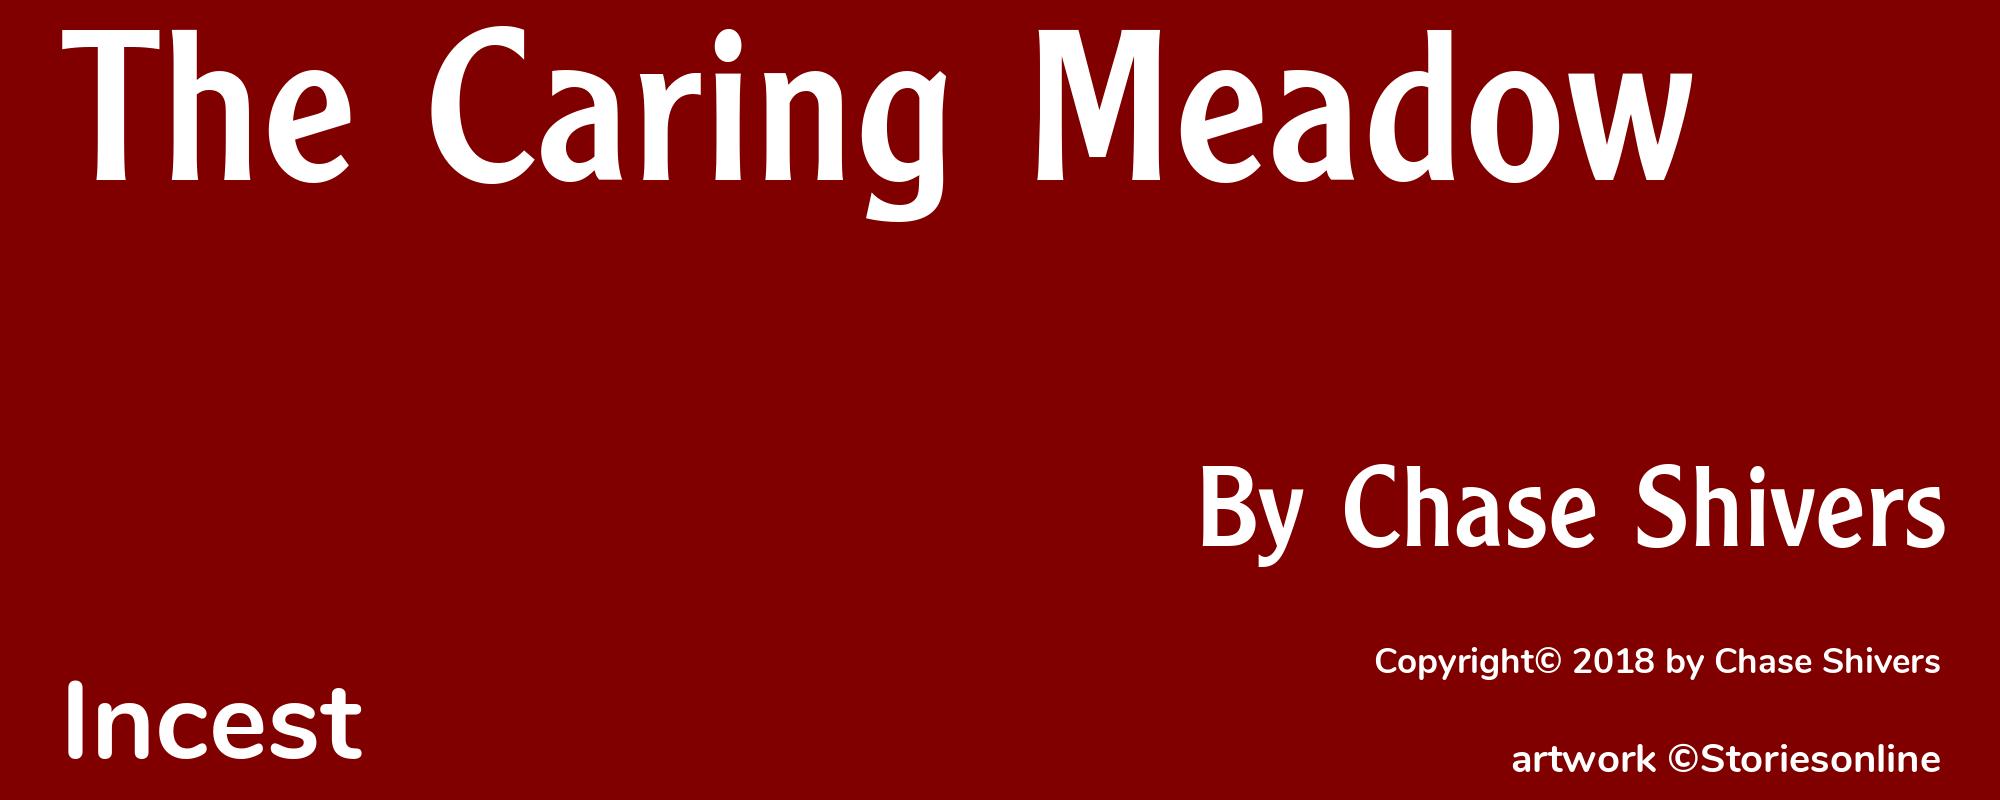 The Caring Meadow - Cover